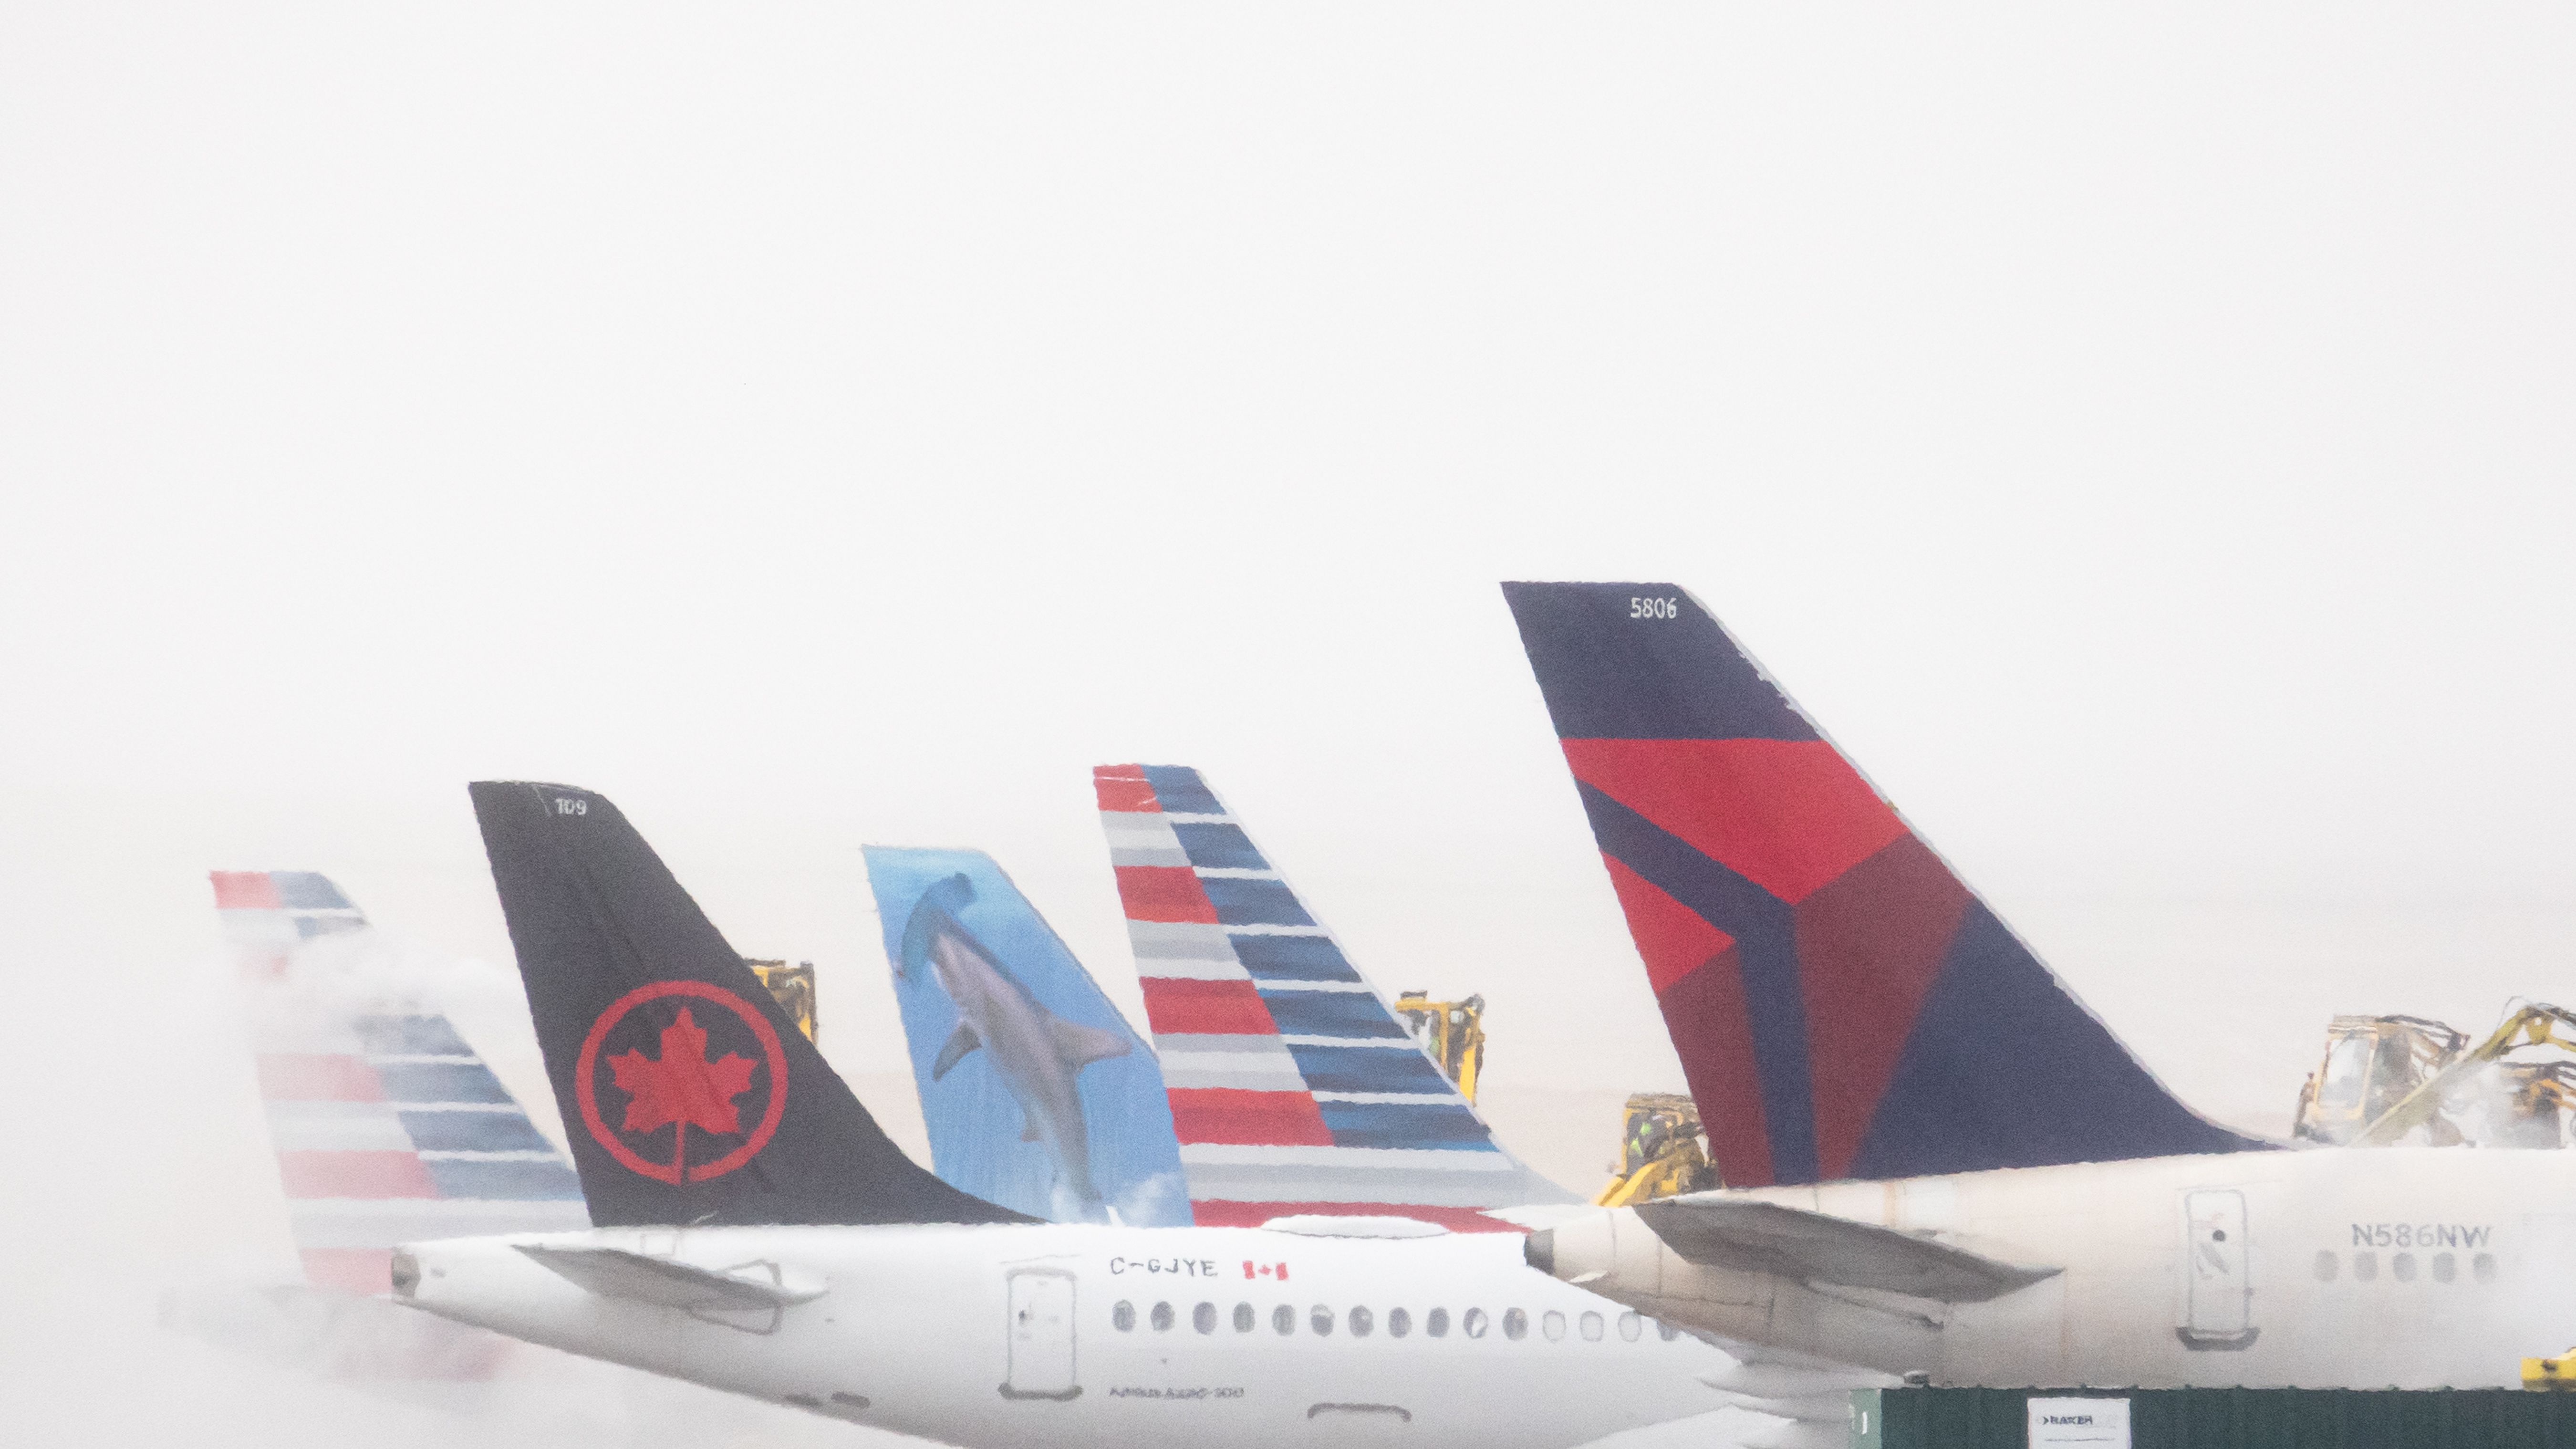 American Airlines, Air Canada Frontier, and Delta in the snow